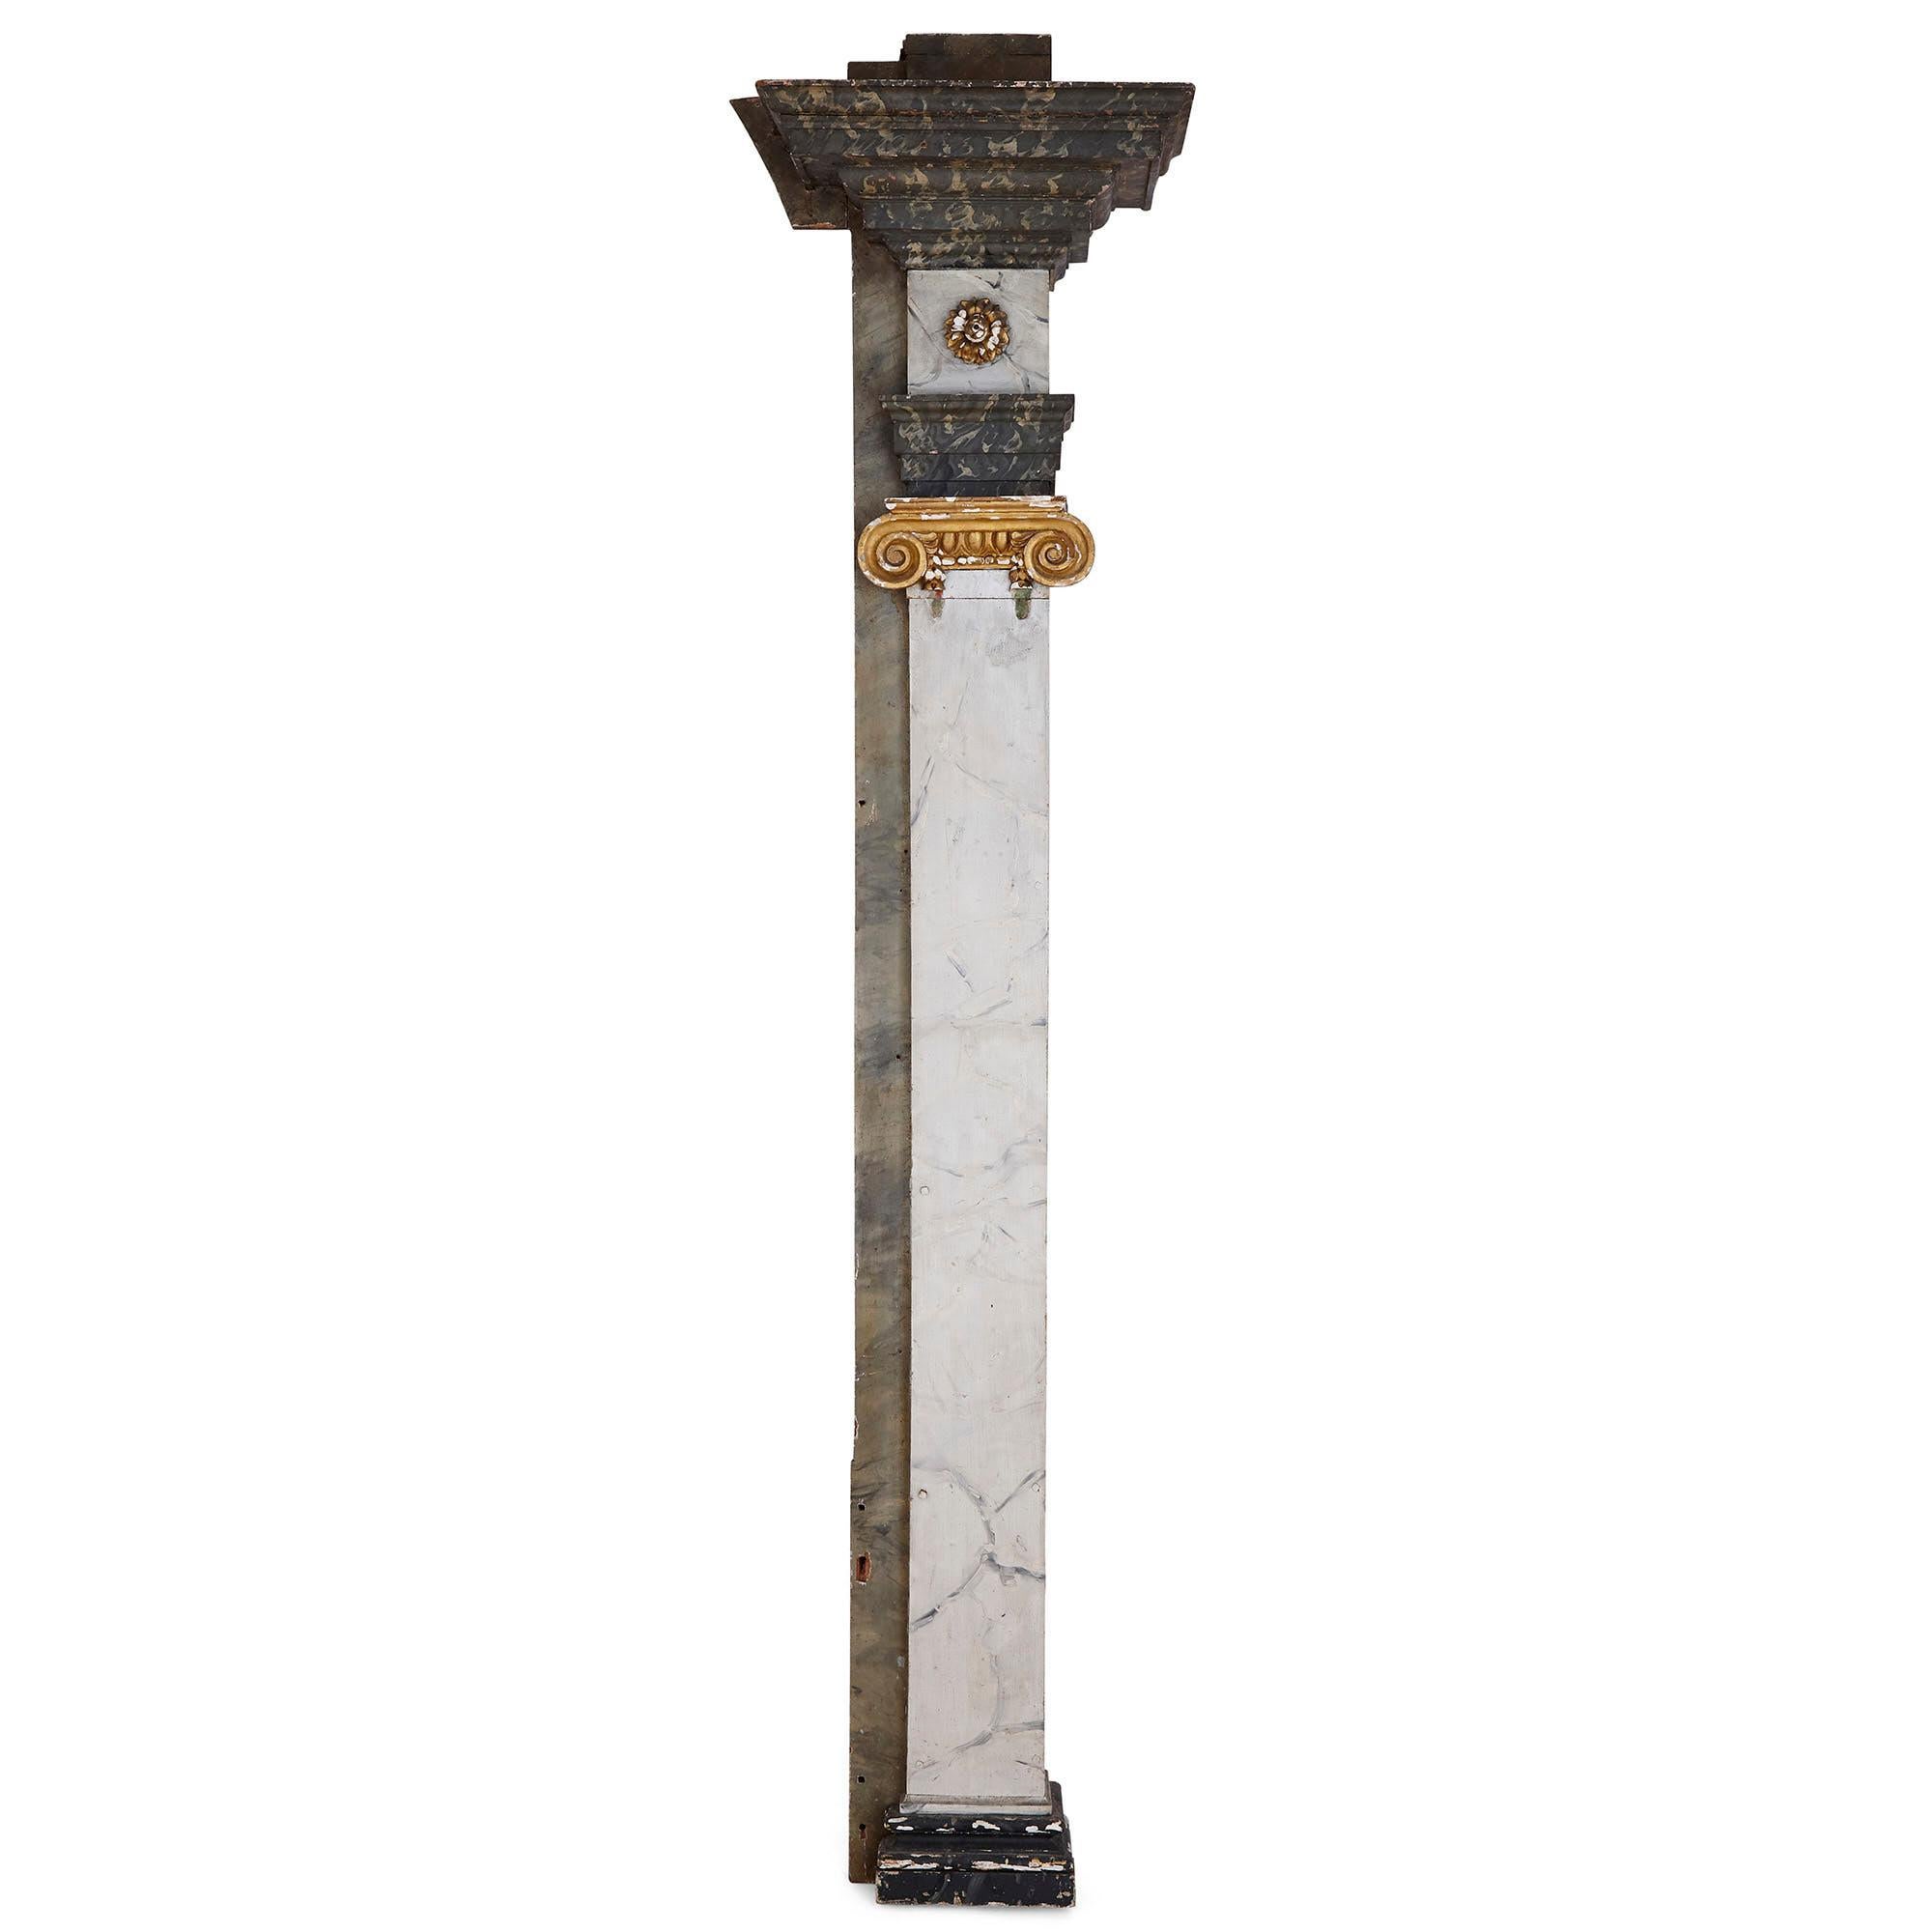 Pair of Continental gesso and wood pilaster columns
Continental, 20th century
Height 245cm, width 55cm, depth 30cm

This elegant pair of pilasters is crafted from gesso and wood in the Ionic style. Each pilaster—a square profile column that is